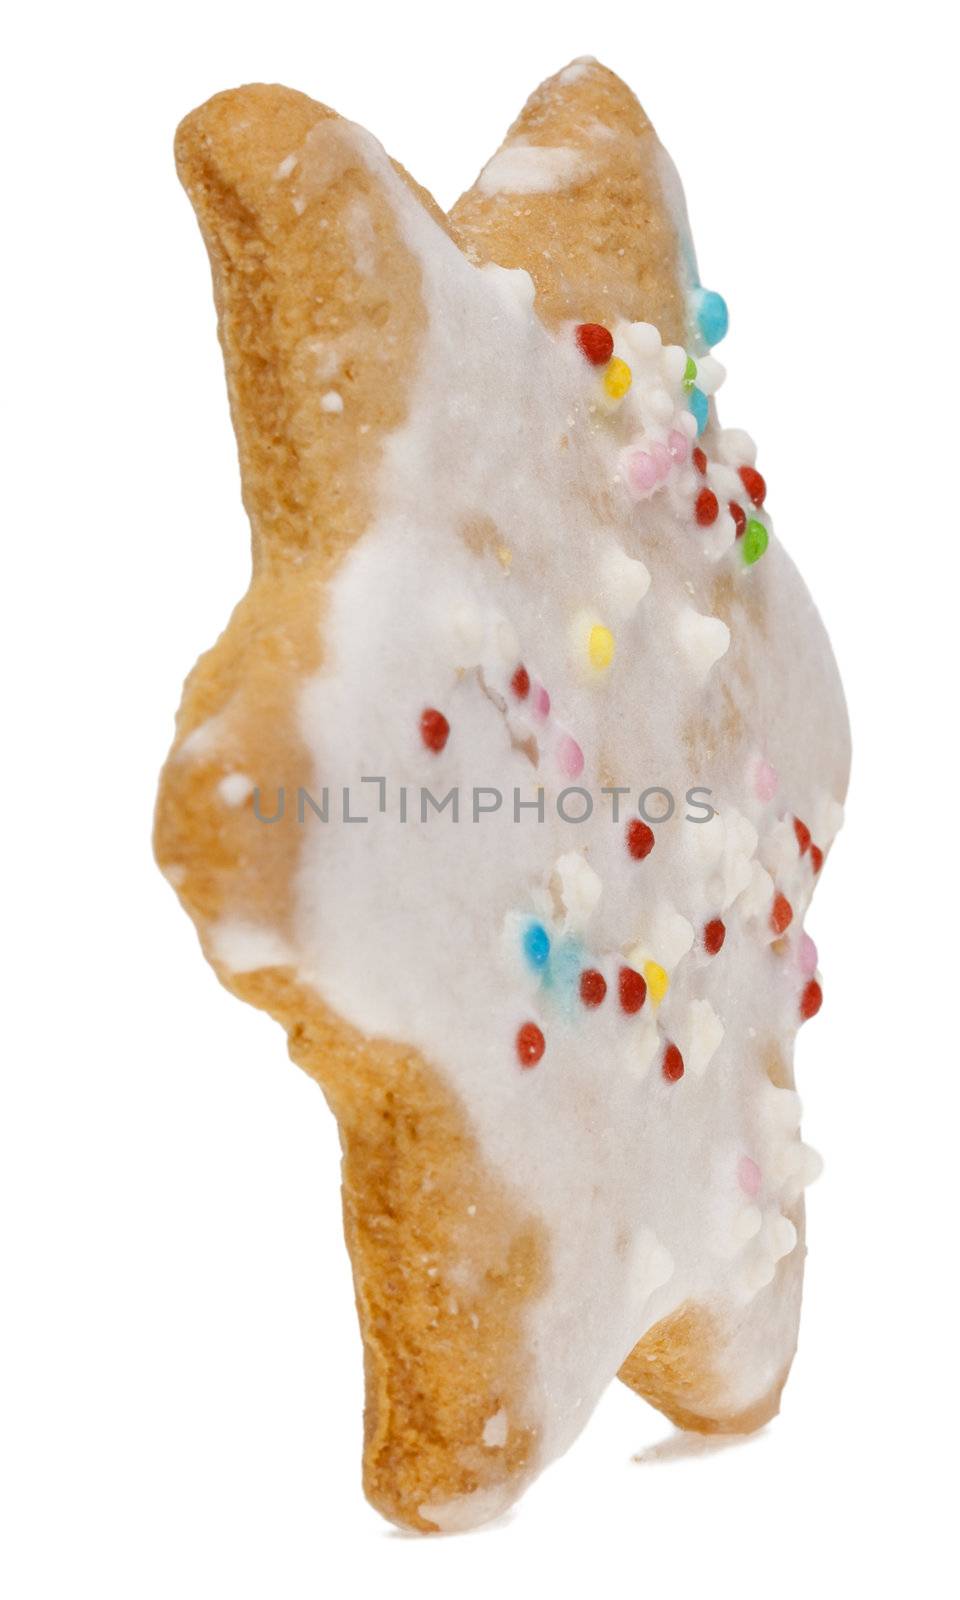 Image of a specific winter Alsatian star-shaped biscuit in a vertical position against a white background.